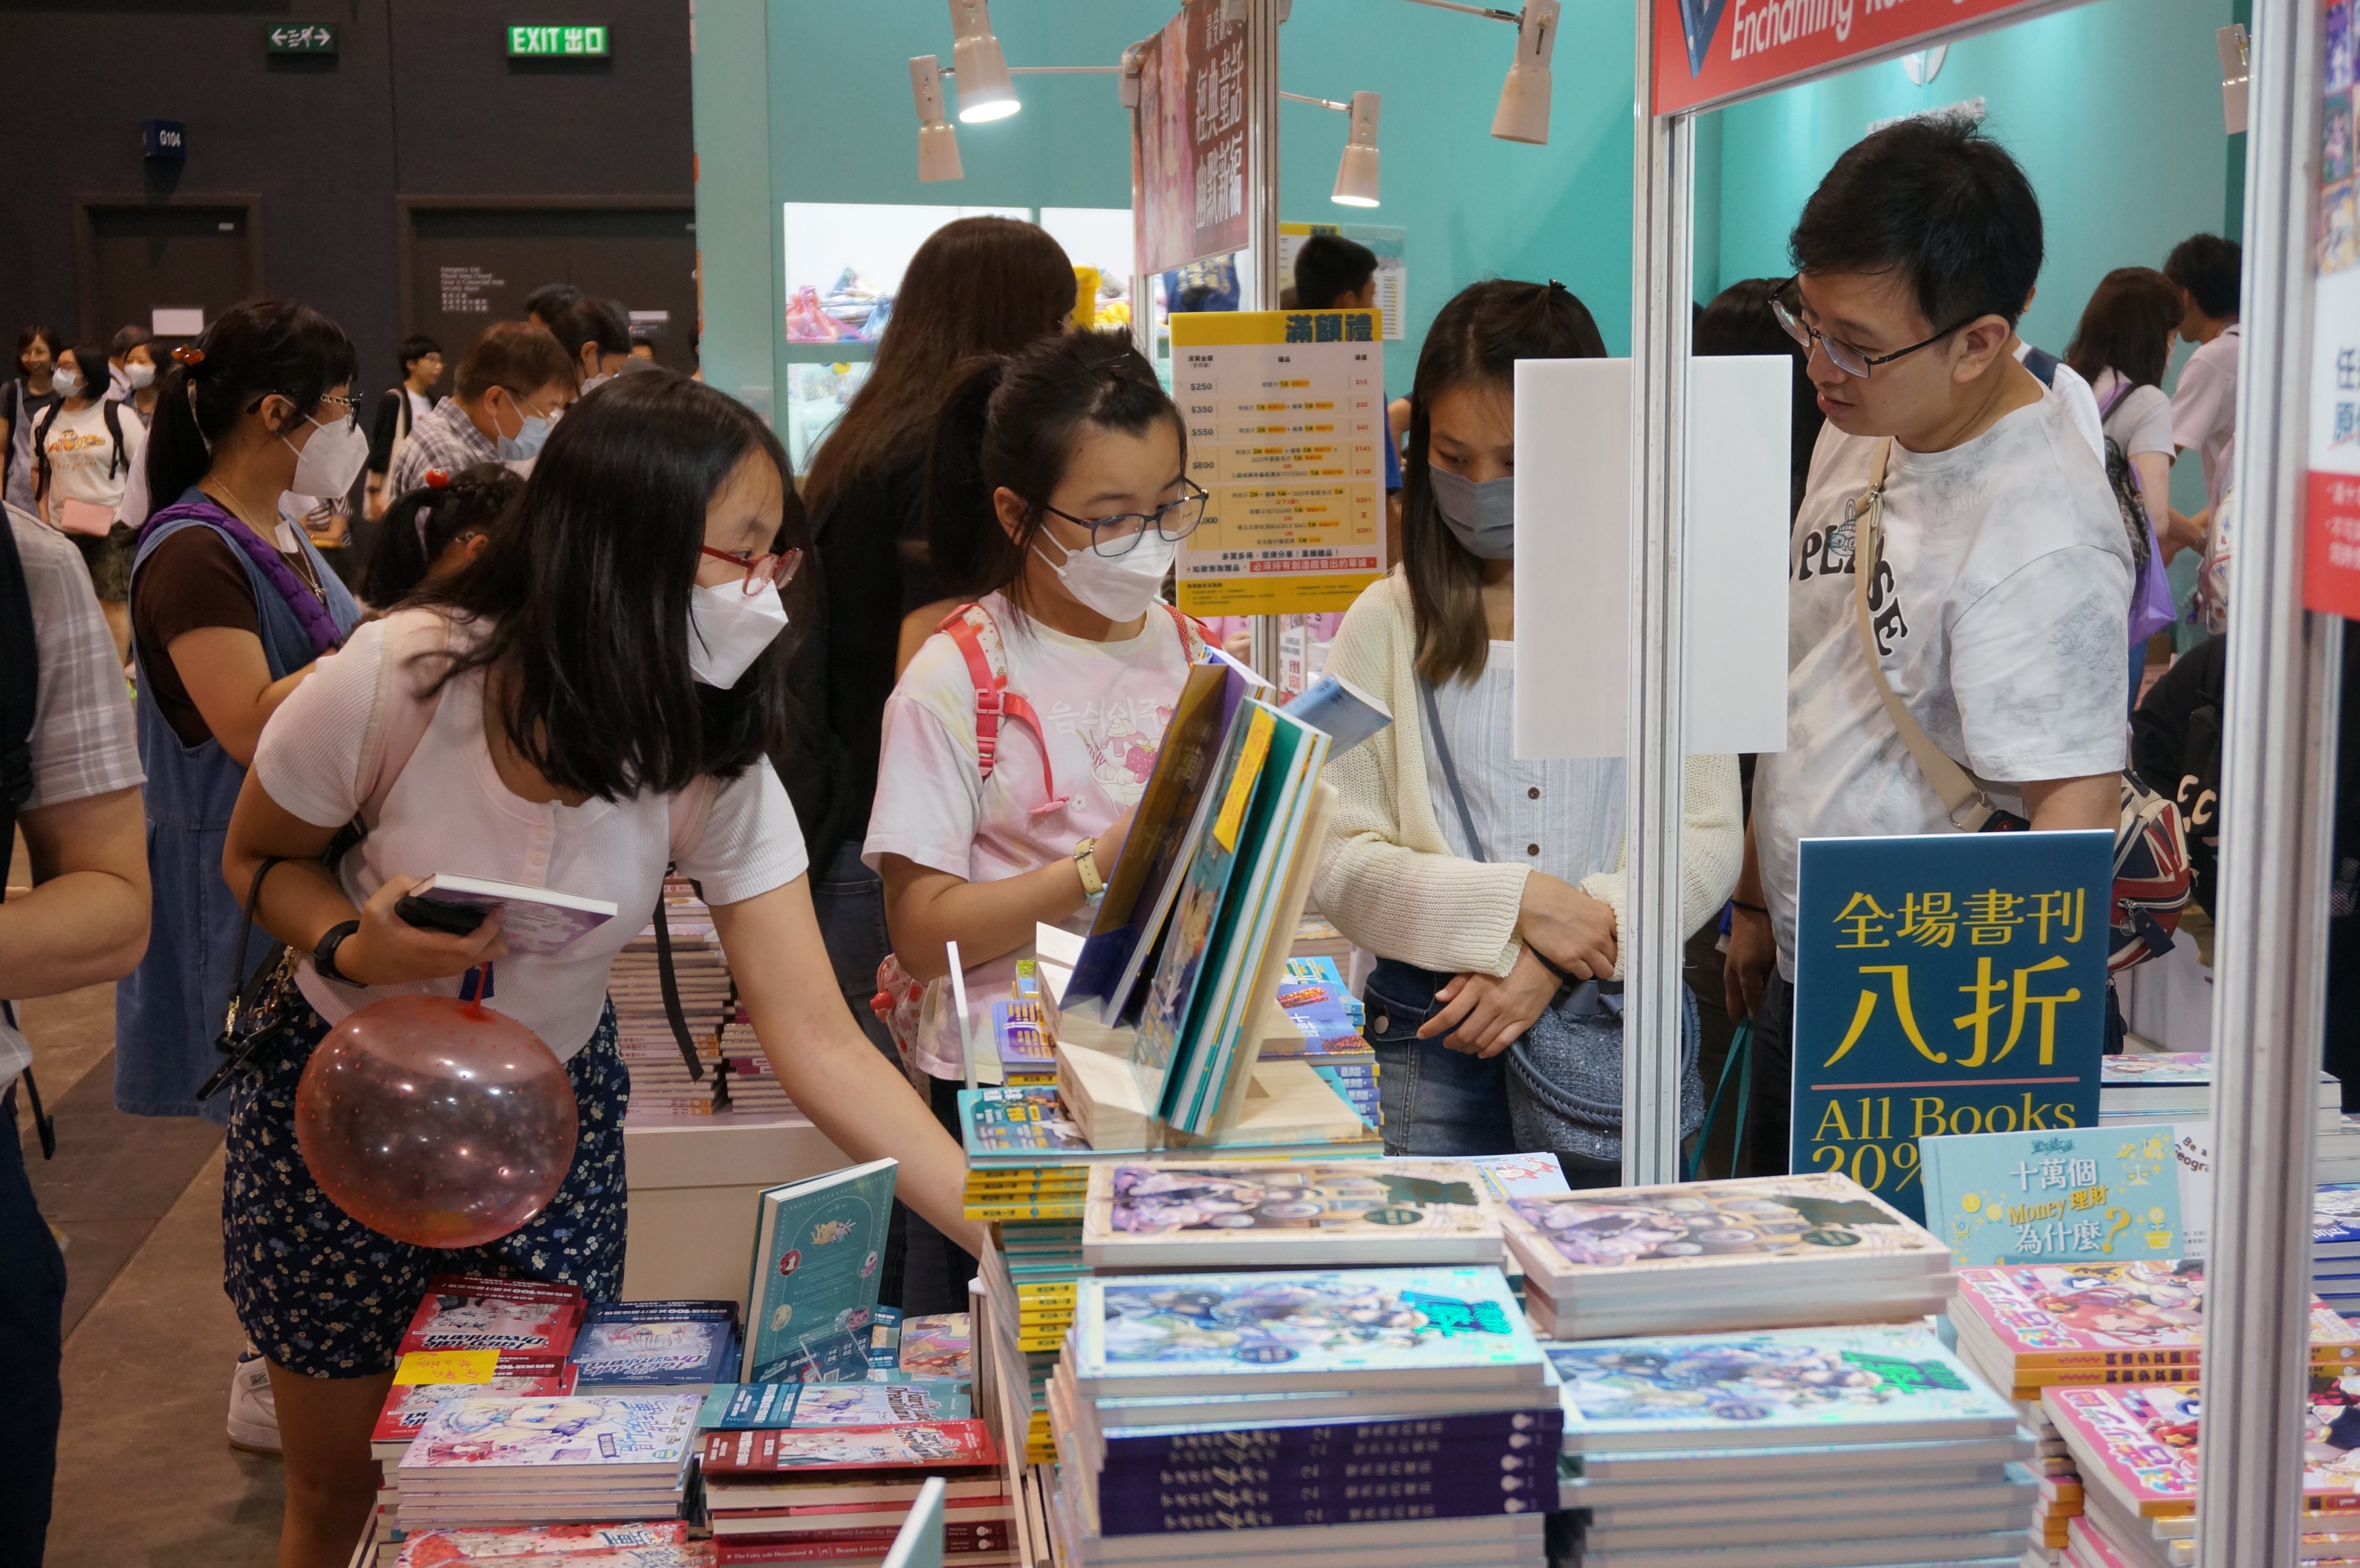 Students on summer holiday browse books at the annual Hong Kong Book Fair. Photo: Hazel Luo